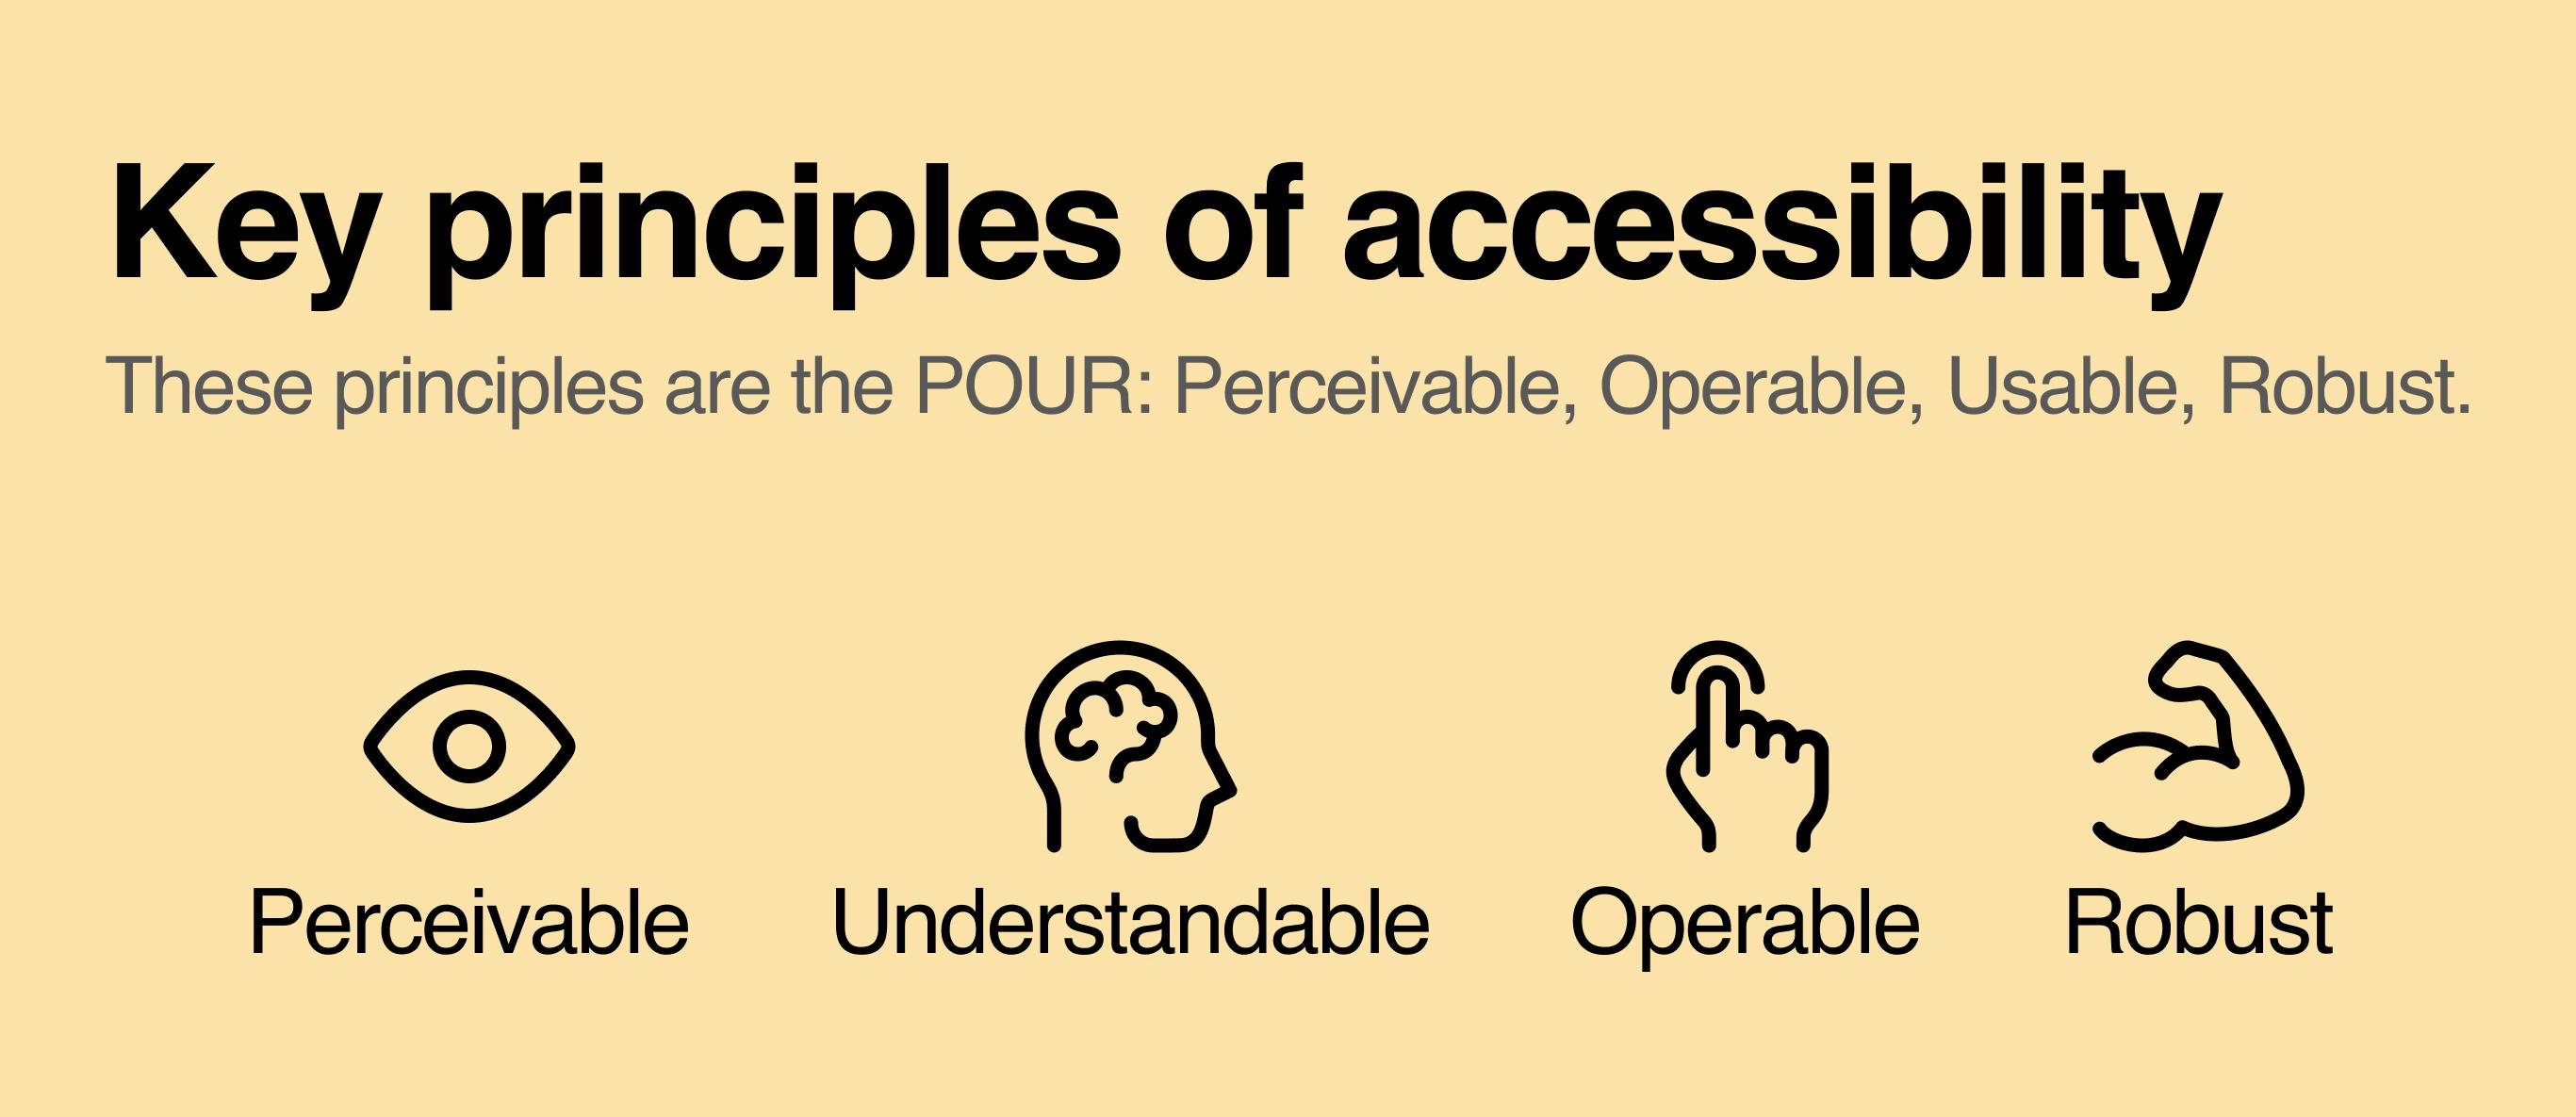 A card showing the key principles of accessibility